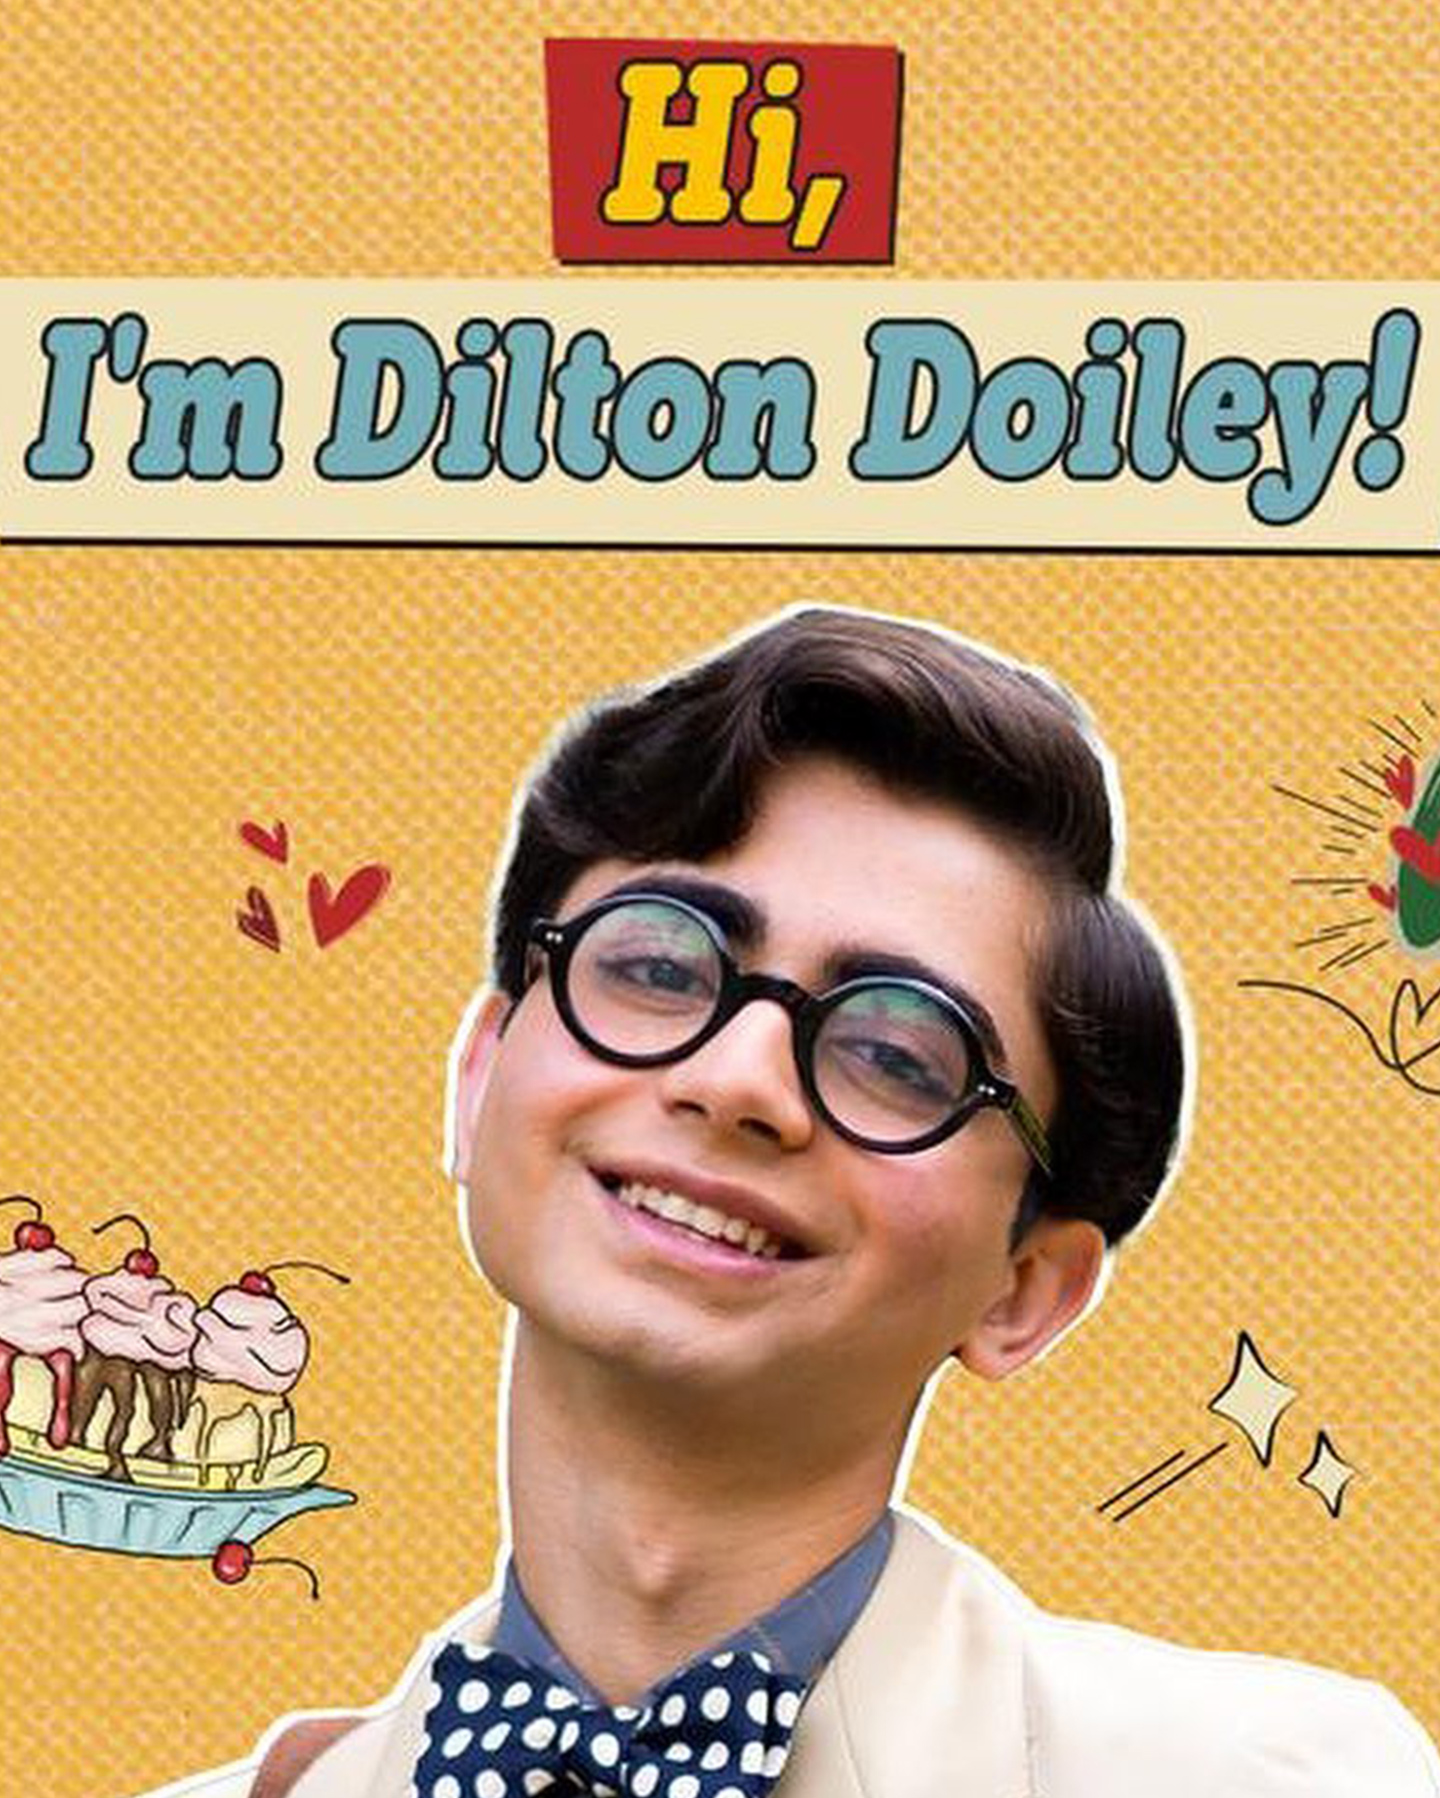 Yuvraj Menda will be playing Dilton Doiley in The Archies